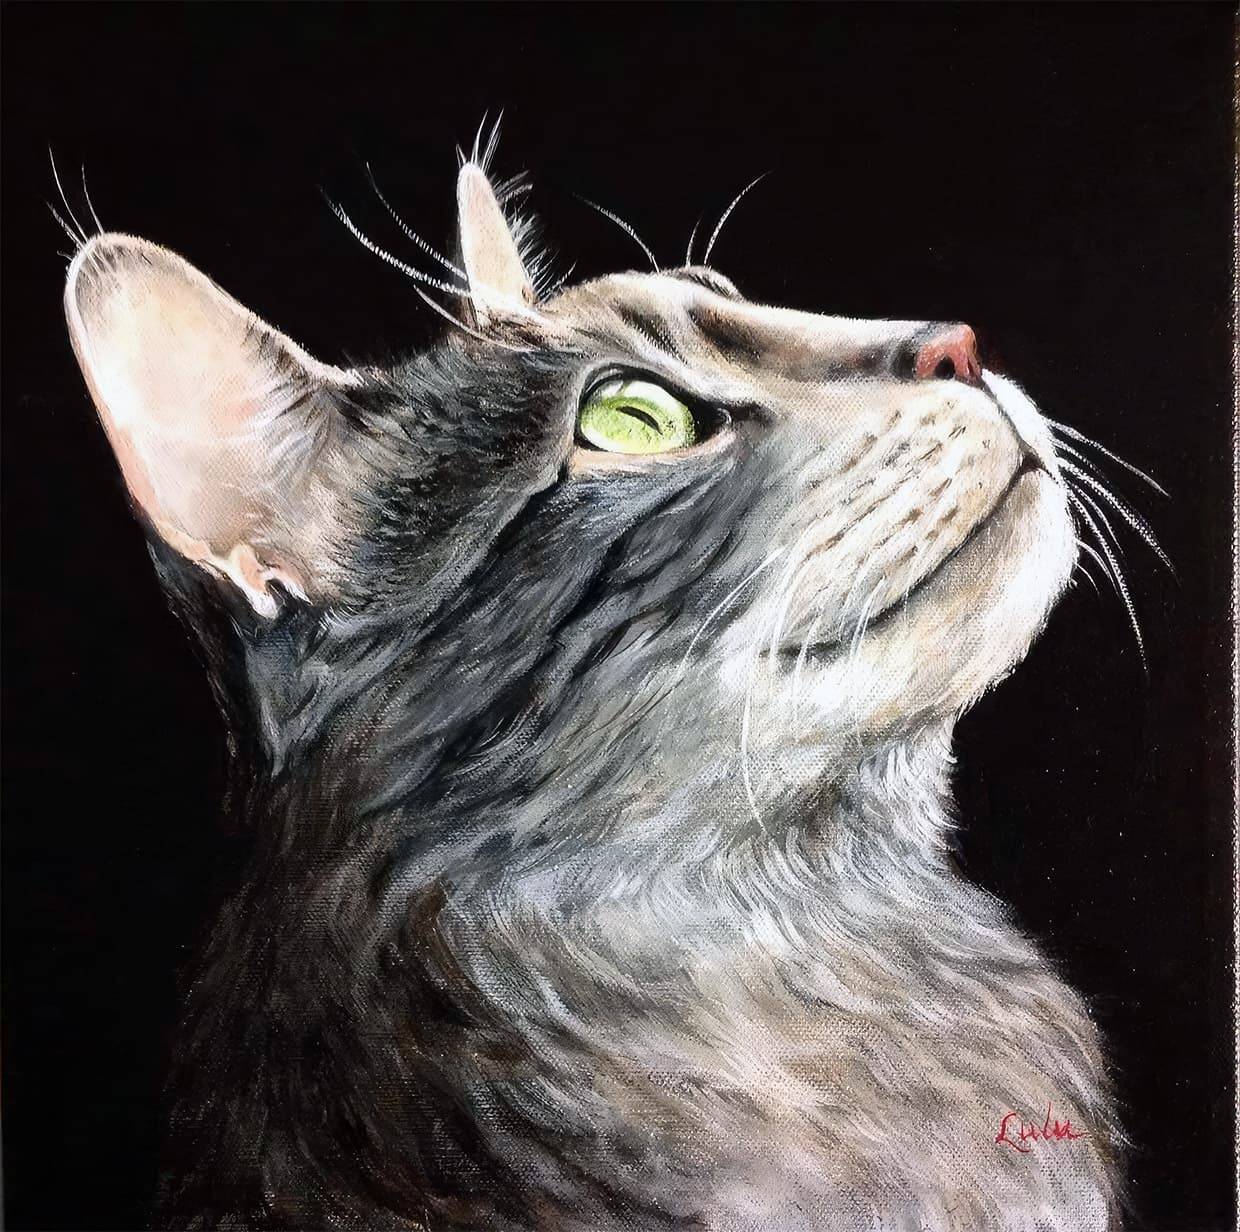 That Loving Gaze, by Lulu Pelletier, acrylic on canvas, 2021, depicts the face of a gray-striped house cat gazing upwards